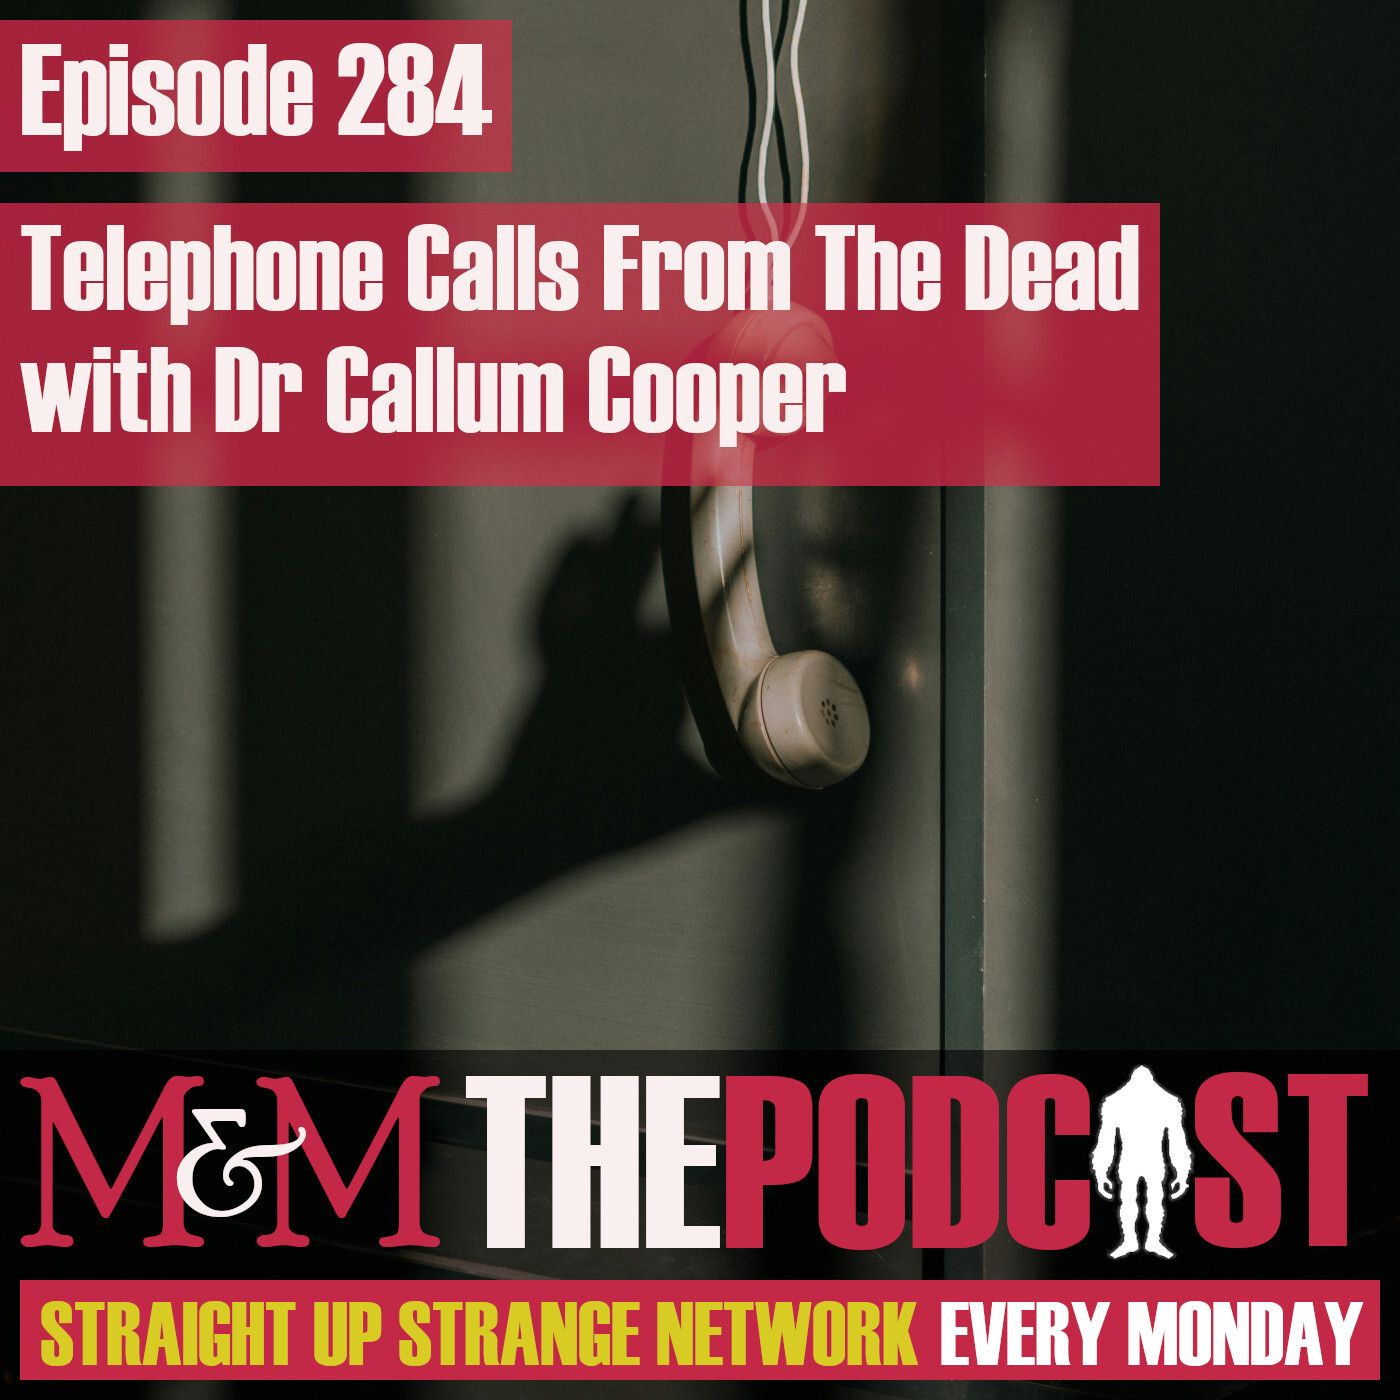 Mysteries and Monsters: Episode 284 Telephone Calls From The Dead with Dr Cal Cooper